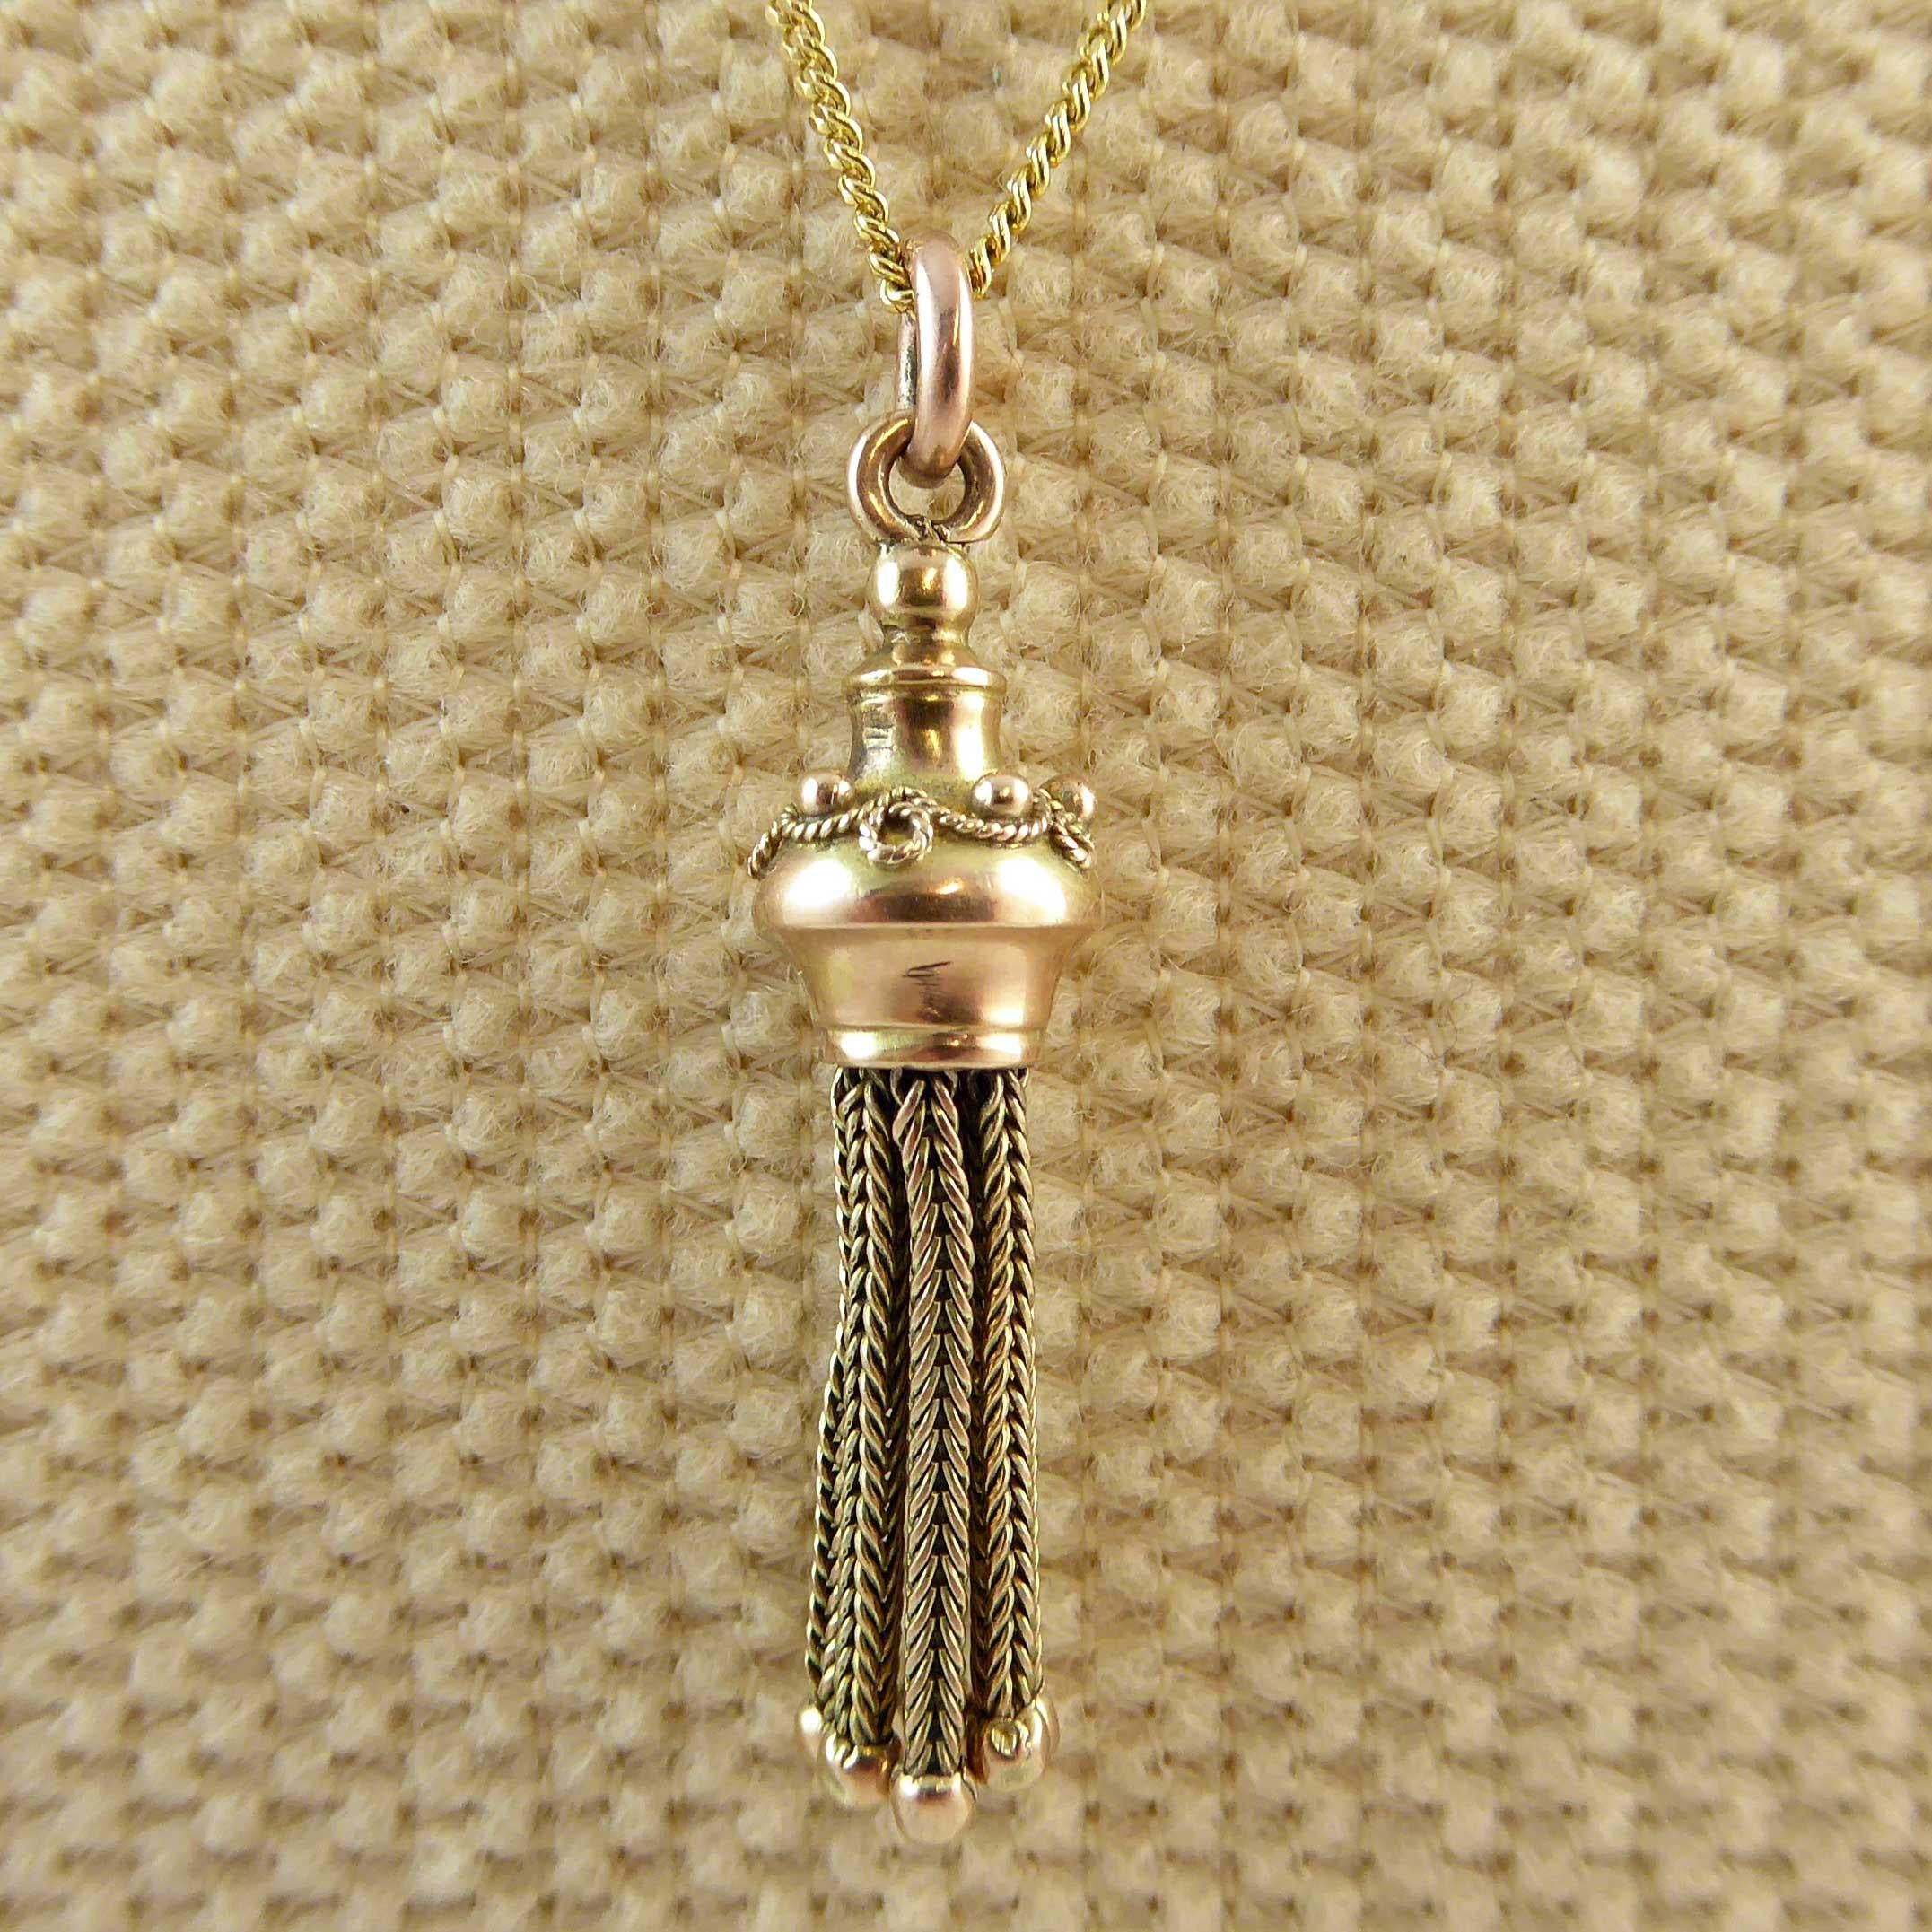 Antique Victorian Gold Tassel Pendant with Modern Chain, 9 Carat Yellow Gold 2